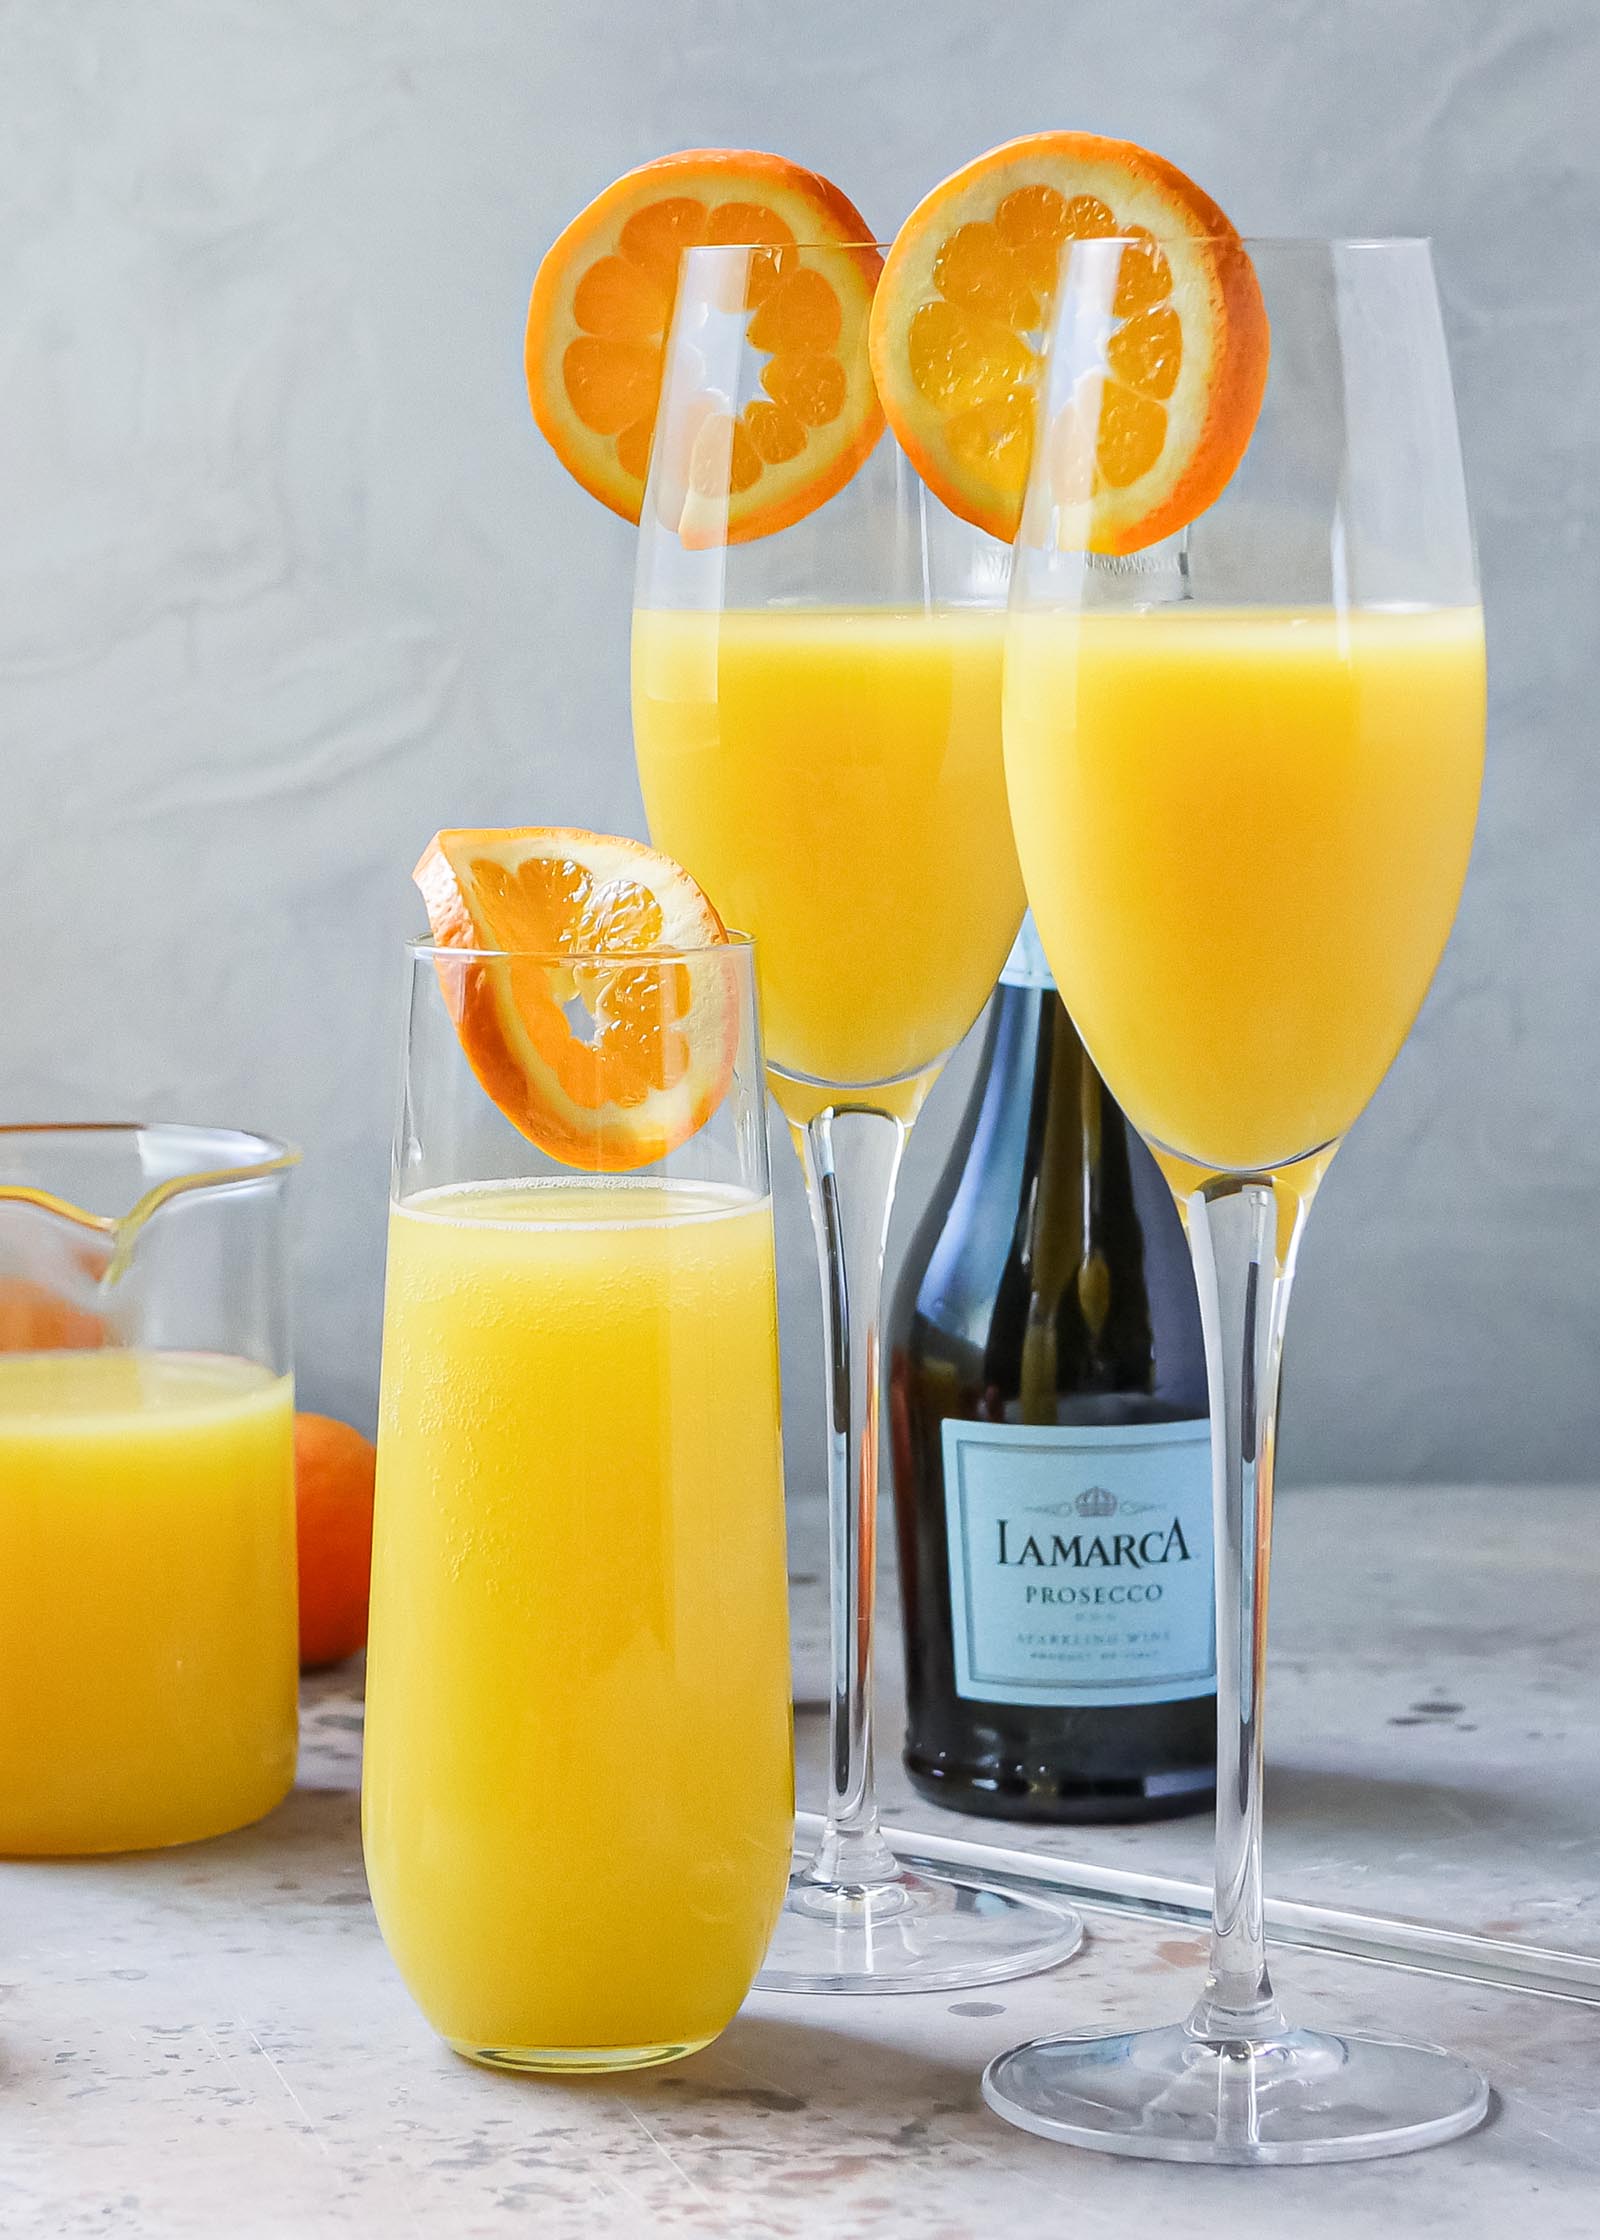 Classic mimosas in champagne flutes. Orange juice and prosecca are behind the glasses.